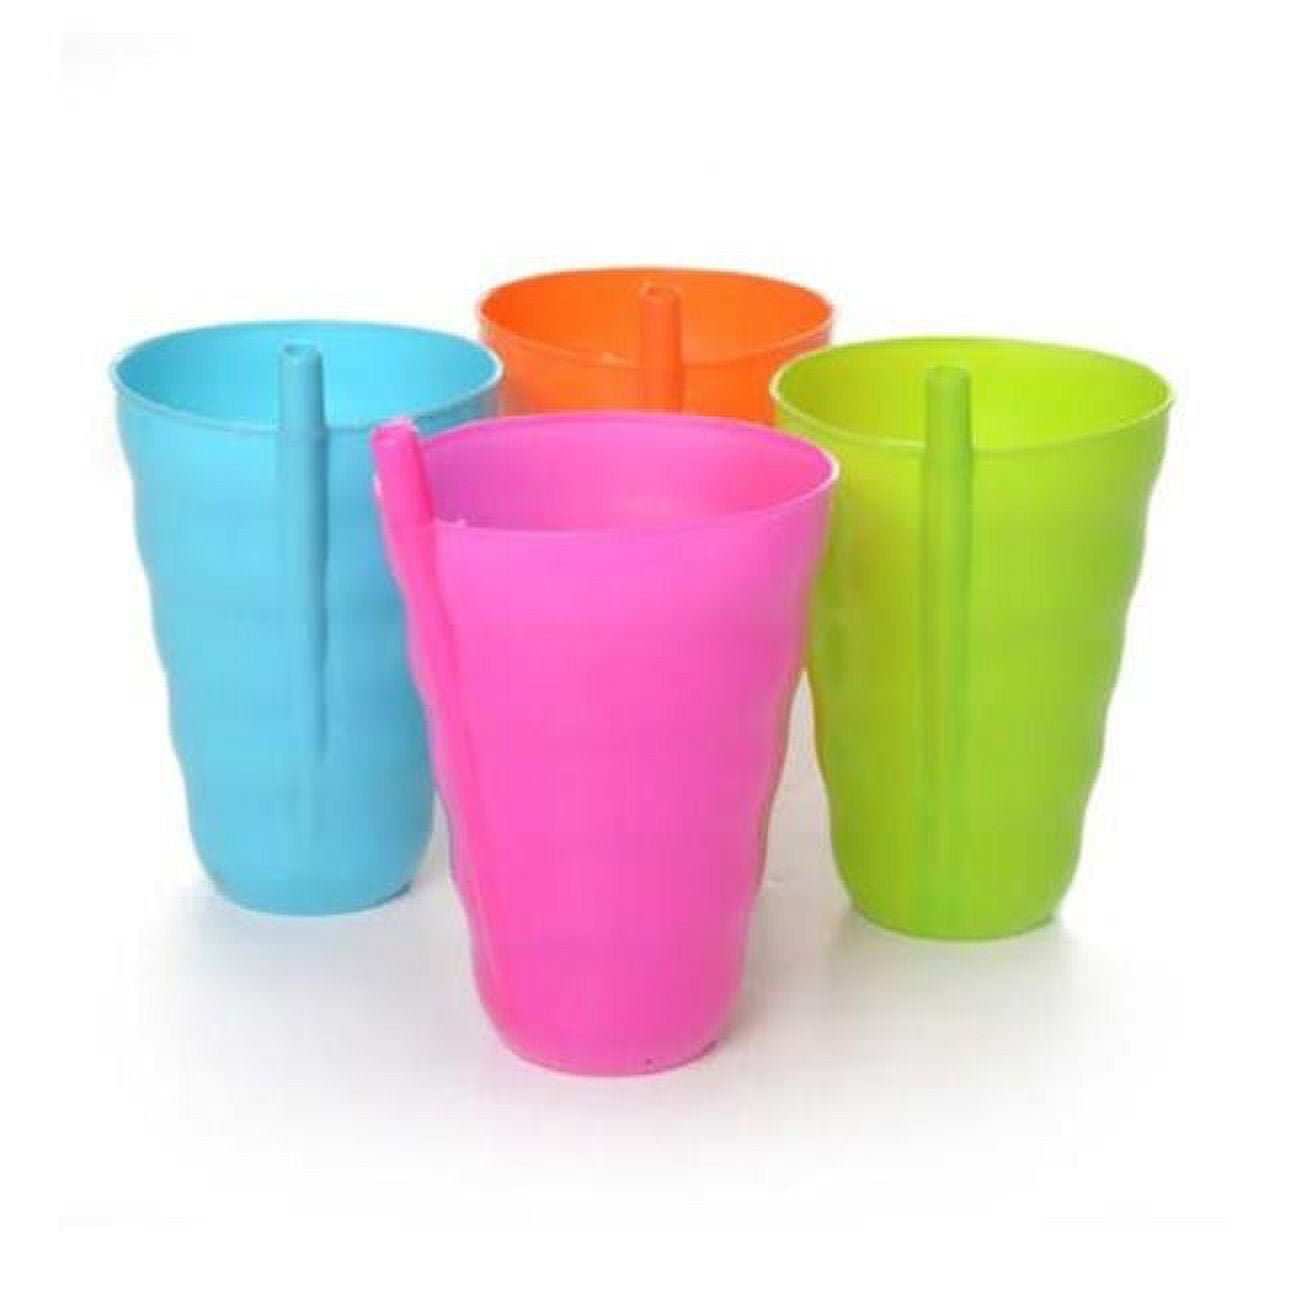 Picture of DDI 2324428 Plastic Cups with Straw - 4 Colors Case of 24